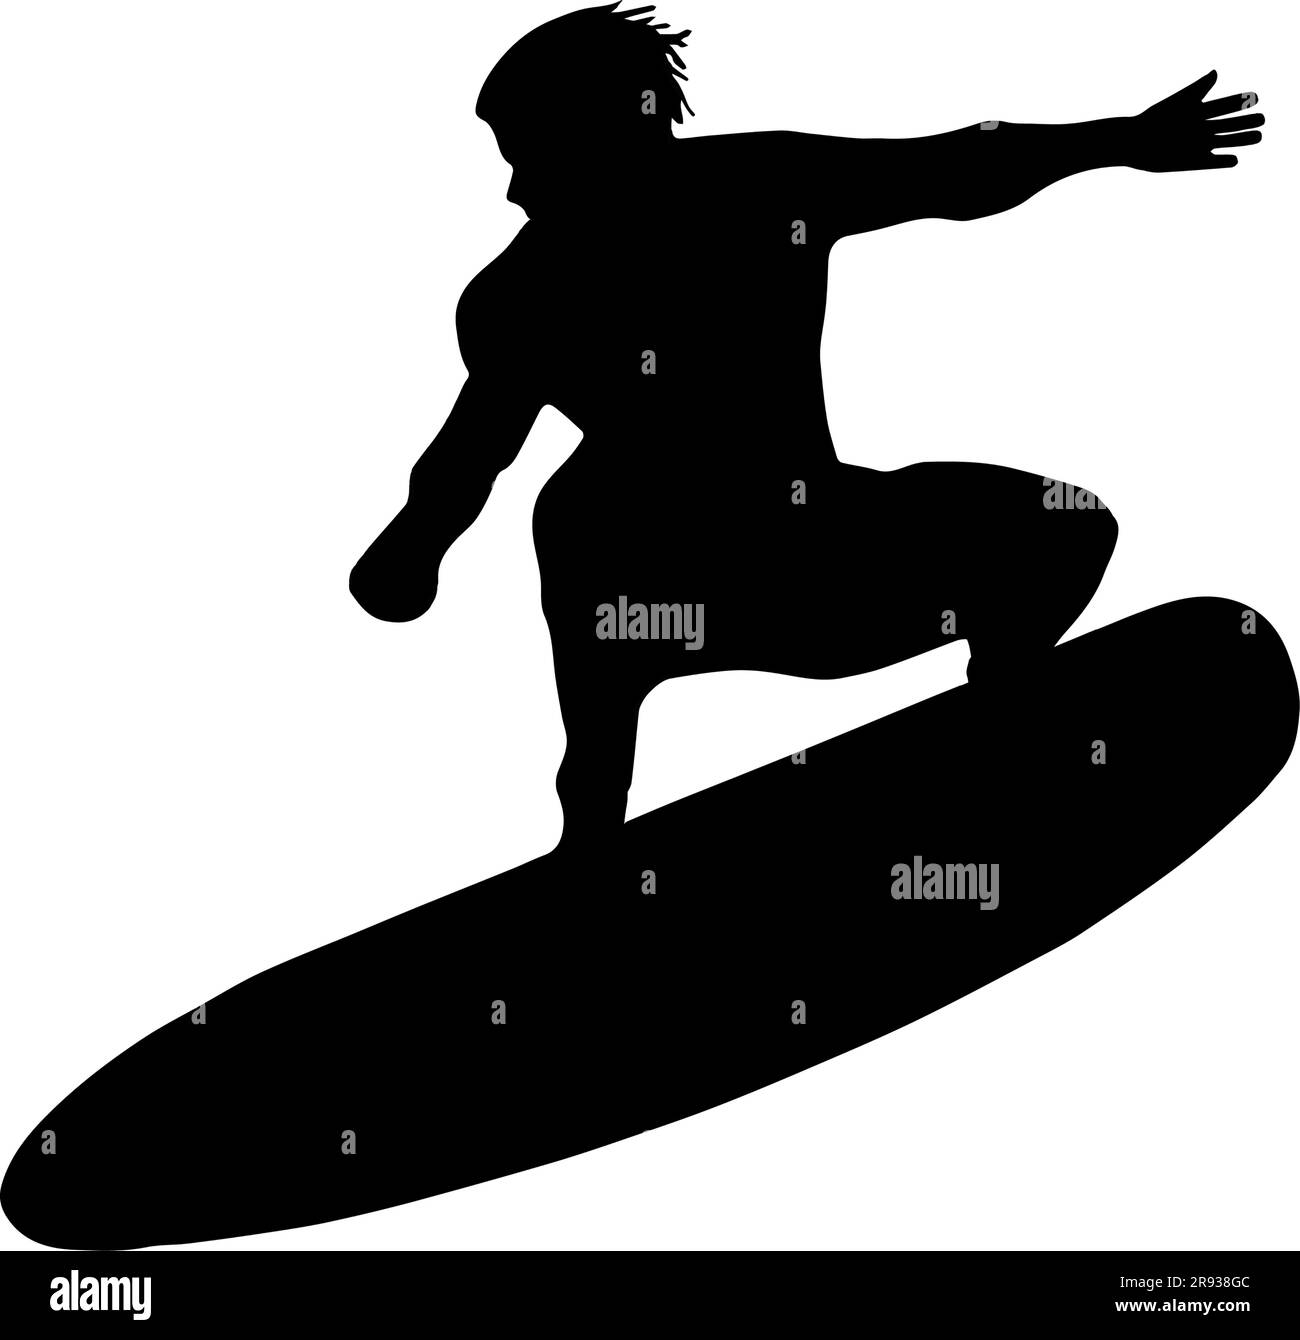 silhouette of a surfer. Black outlines in front of transparent ...